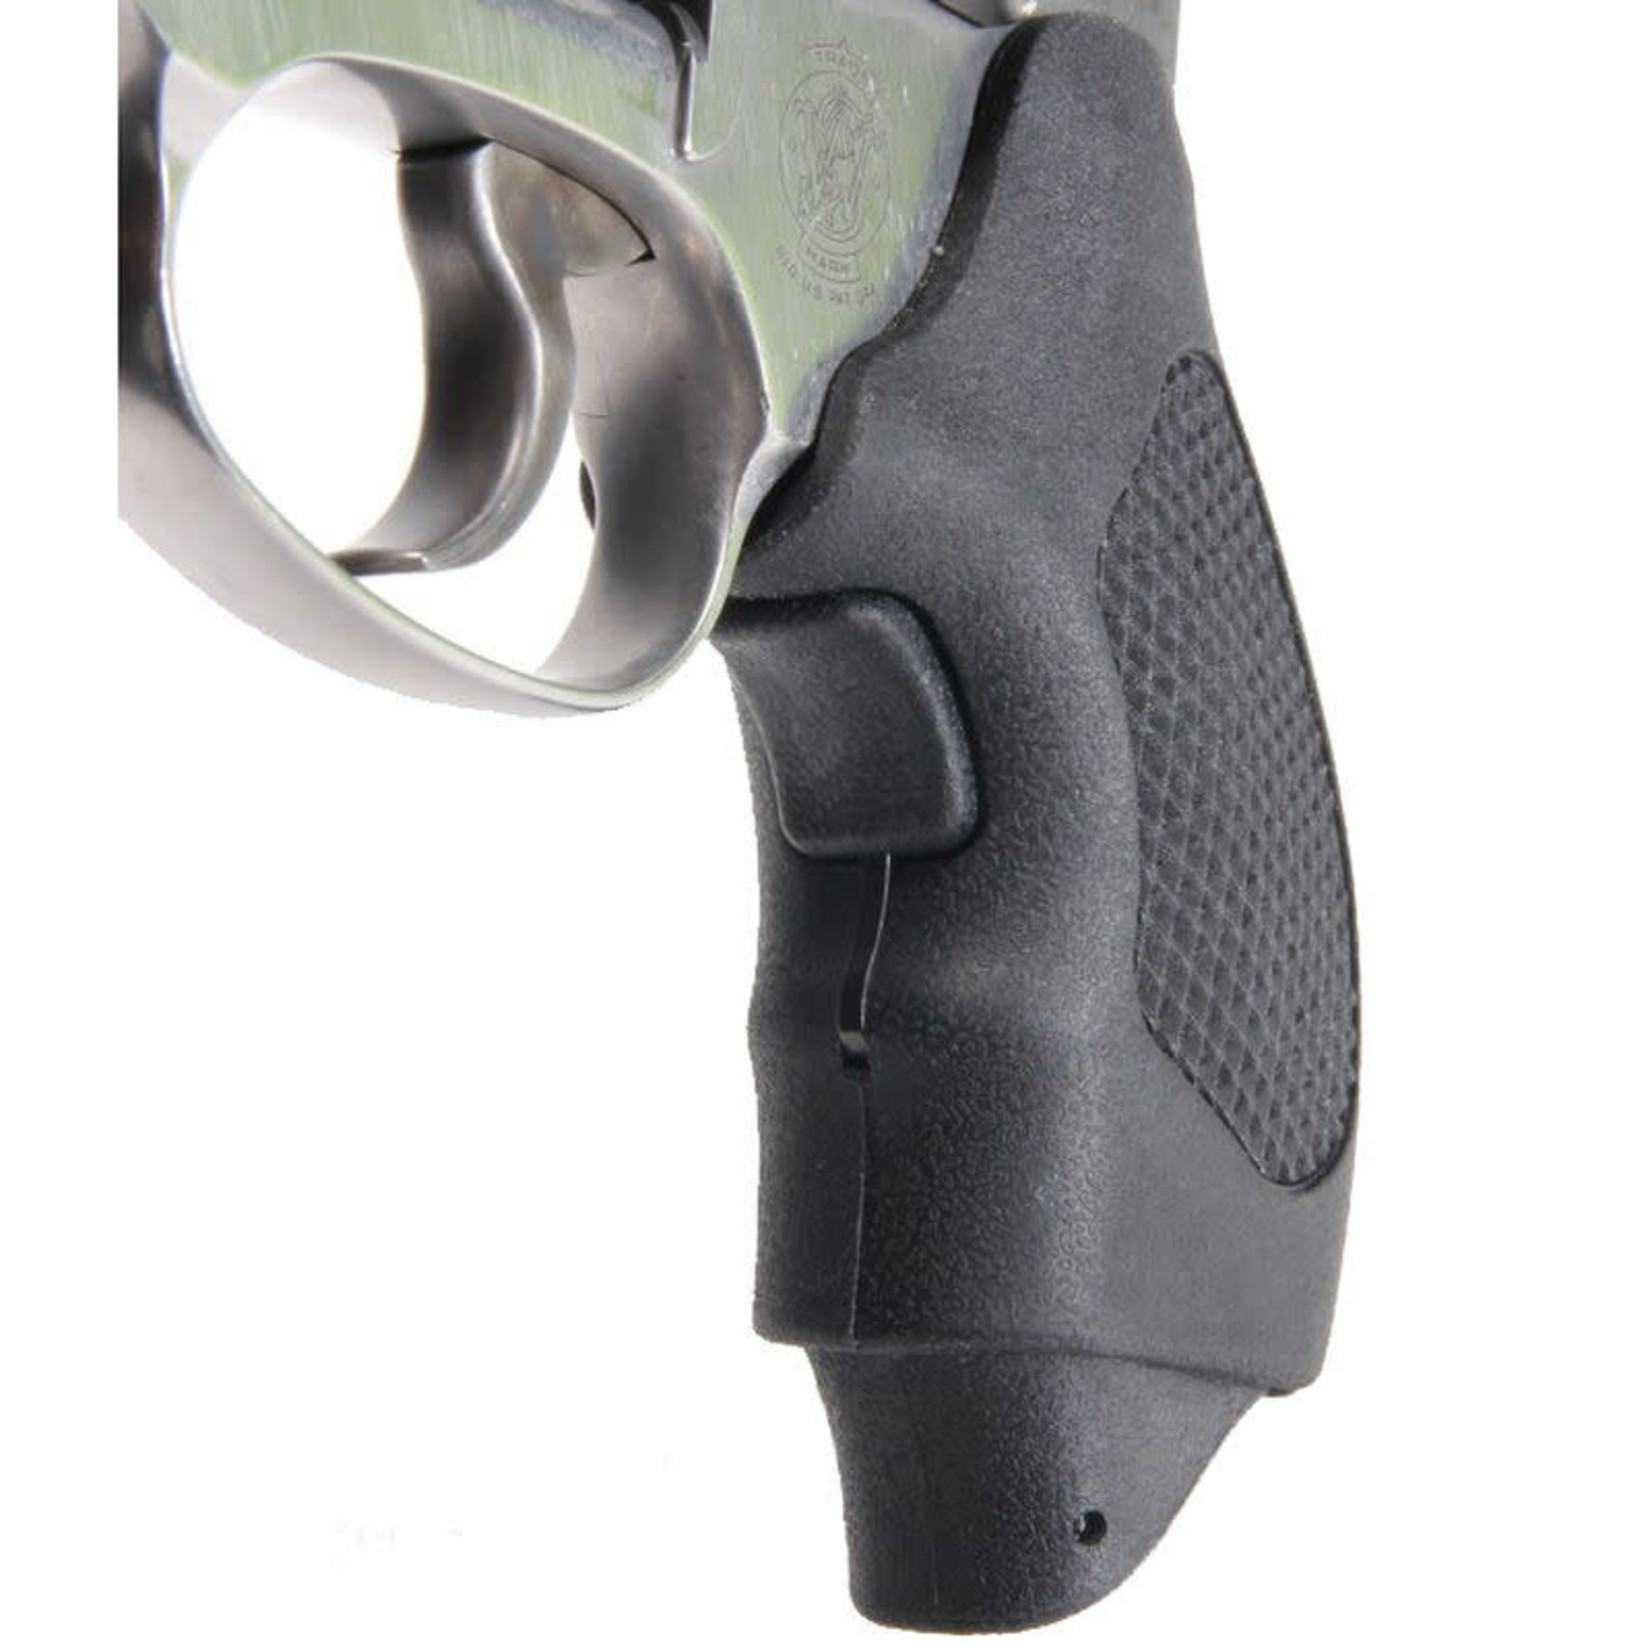 PACHMAYR GUARDIAN GRIP FOR S&W J FRAME